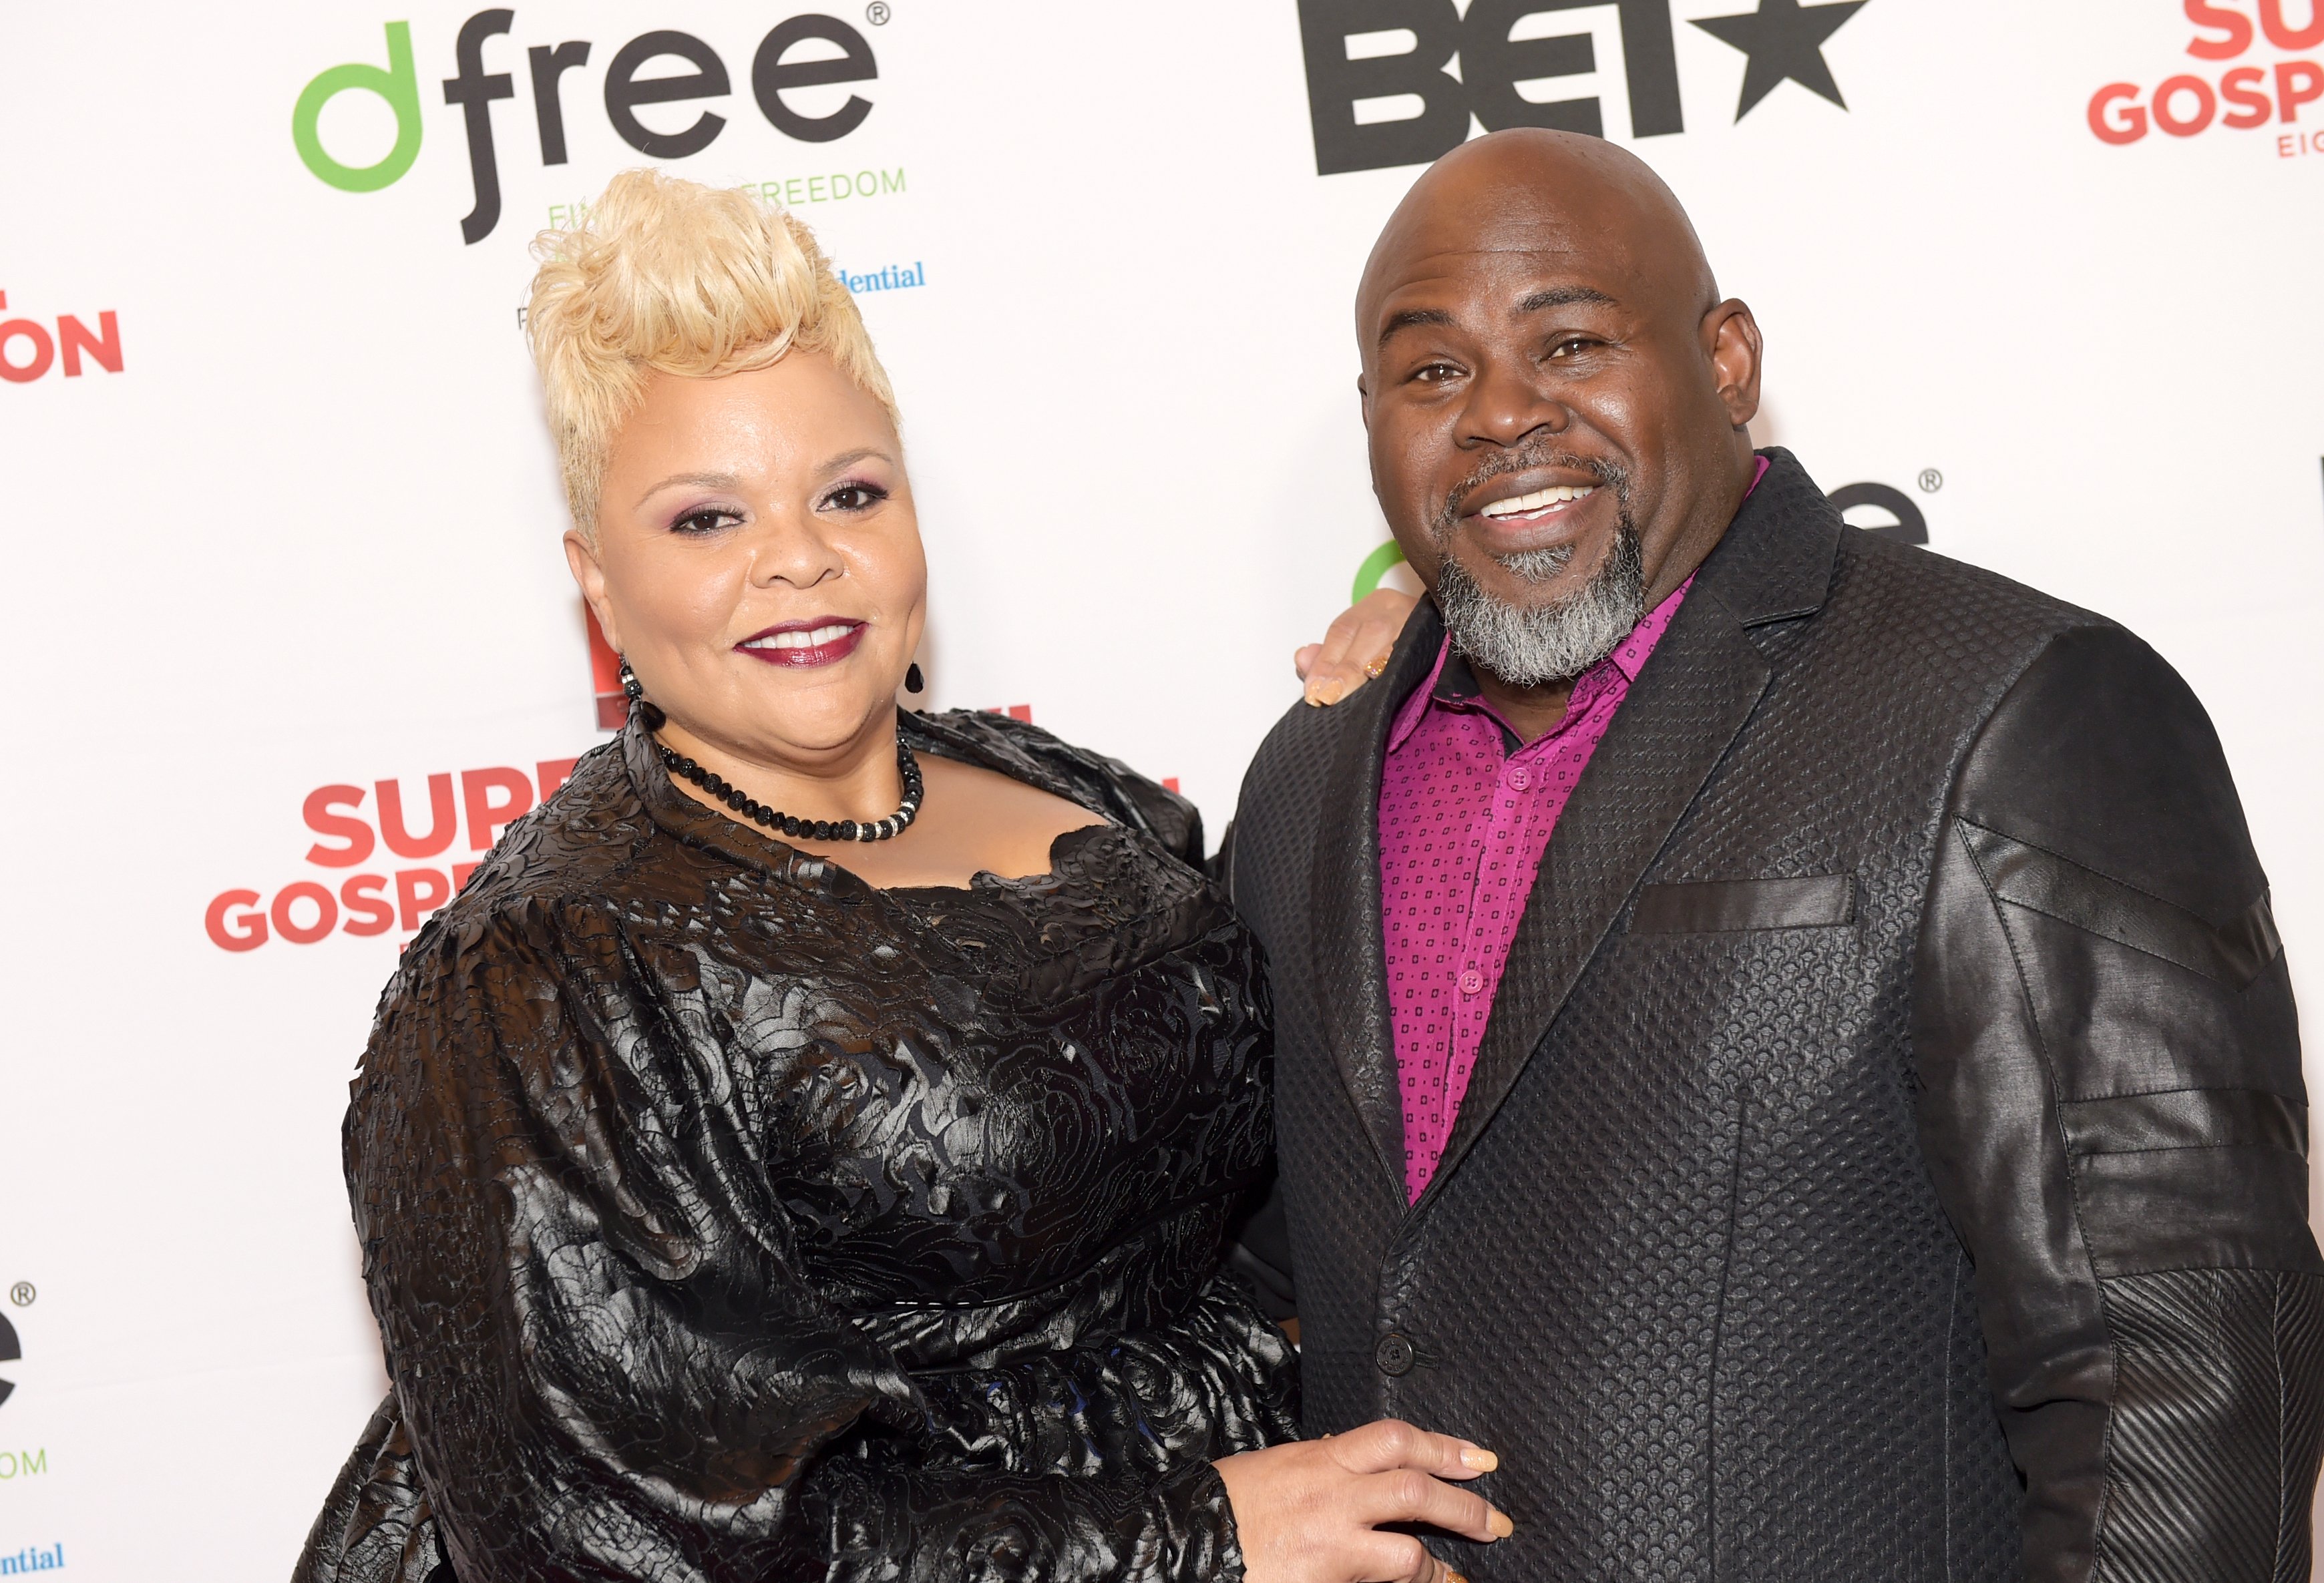  Tamela Mann and David Mann attend the BET Presents Super Bowl Gospel Celebration at Lakewood Church on February 3, 2017 in Houston, Texas. | Photo: Getty Images